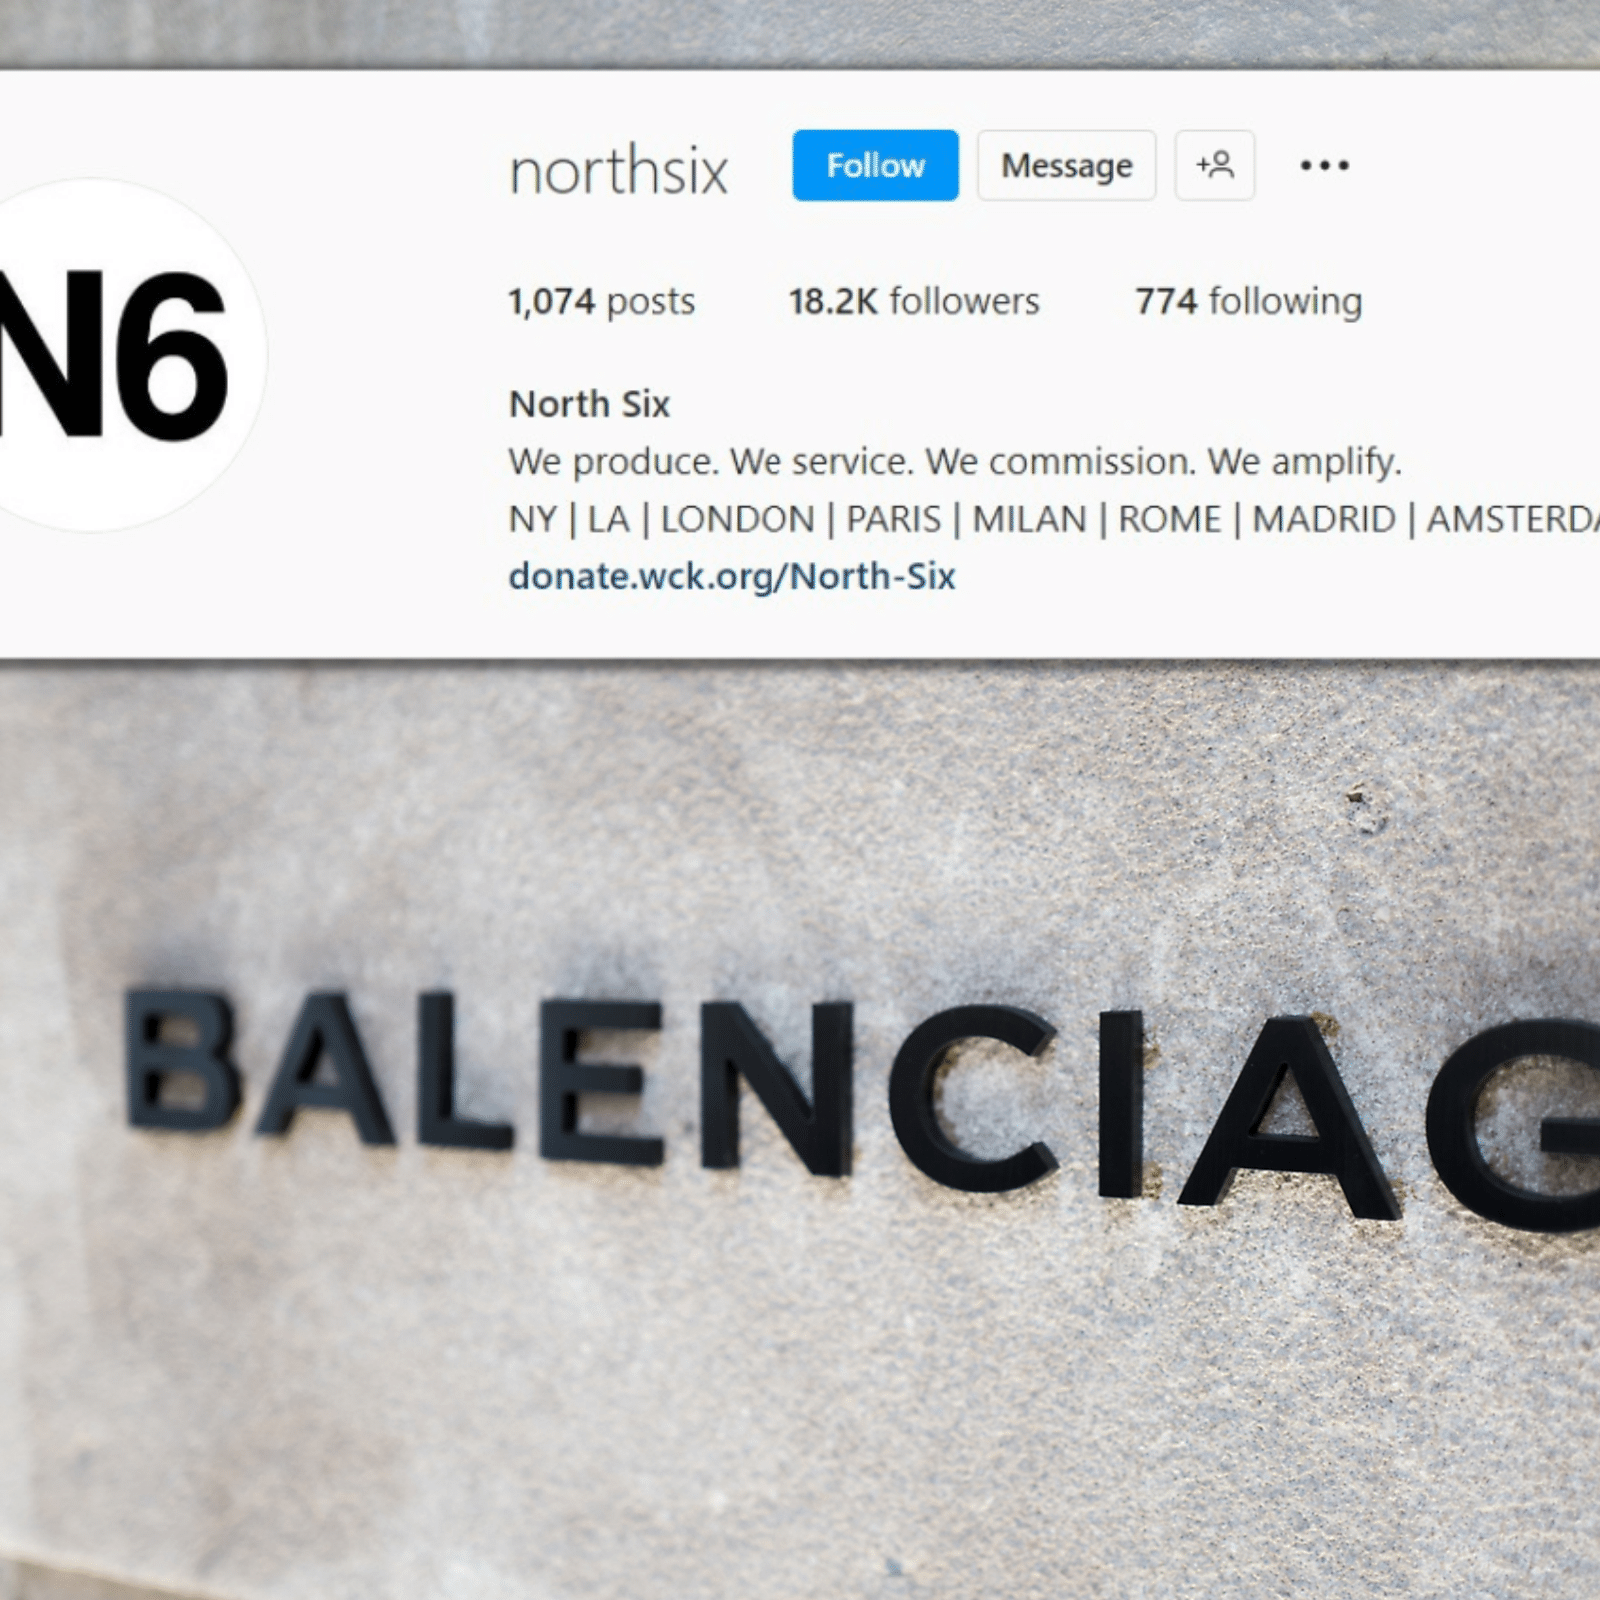 Balenciaga: The latest offender of a larger problem – Spartan Shield